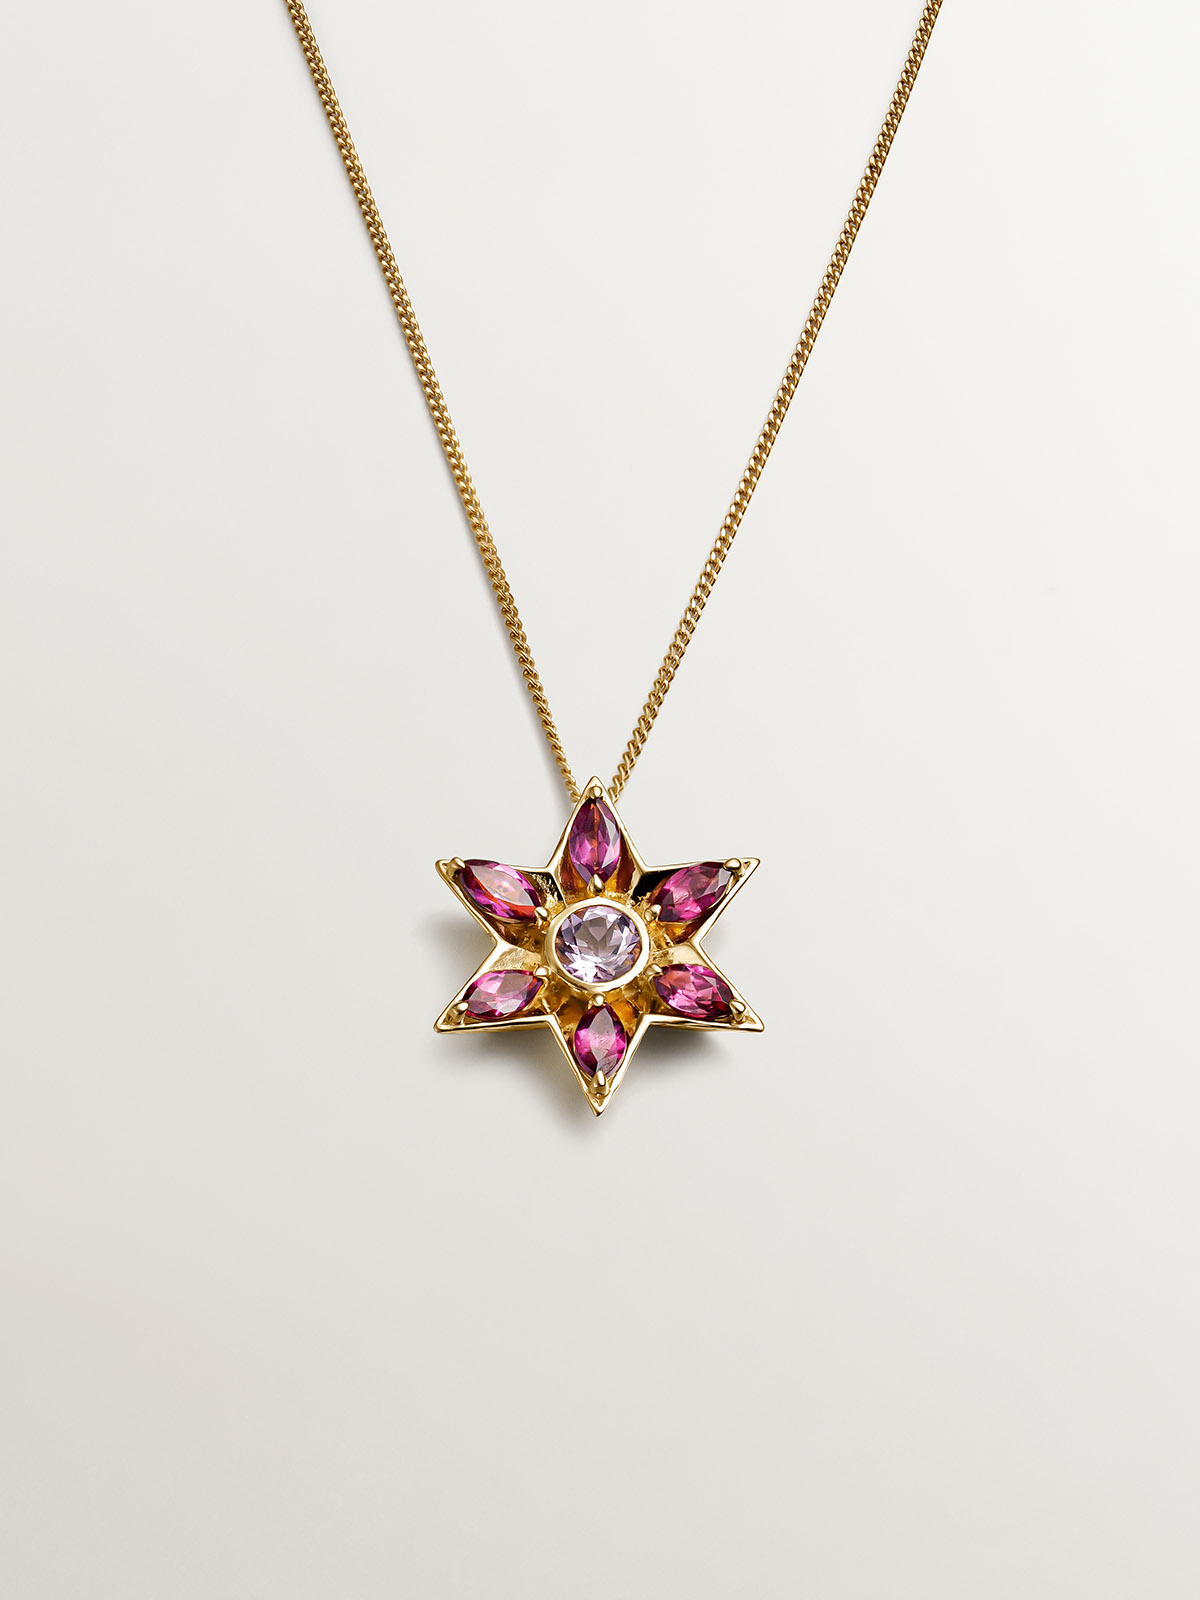 925 Silver pendant bathed in 18K yellow gold with amethysts and rhodolites in the shape of a flower.